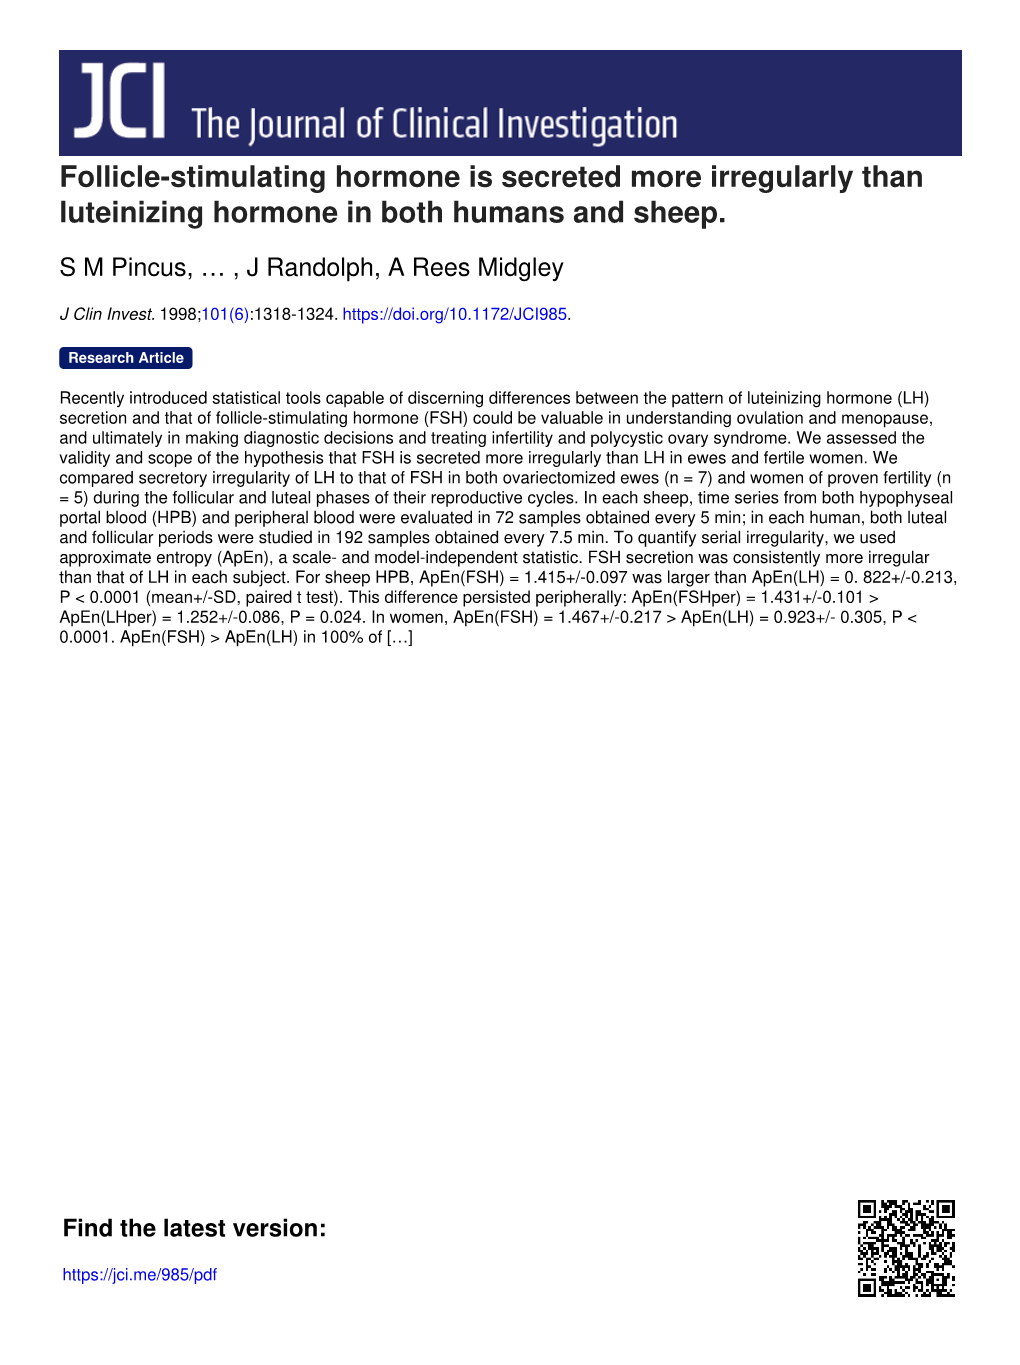 Follicle-Stimulating Hormone Is Secreted More Irregularly Than Luteinizing Hormone in Both Humans and Sheep